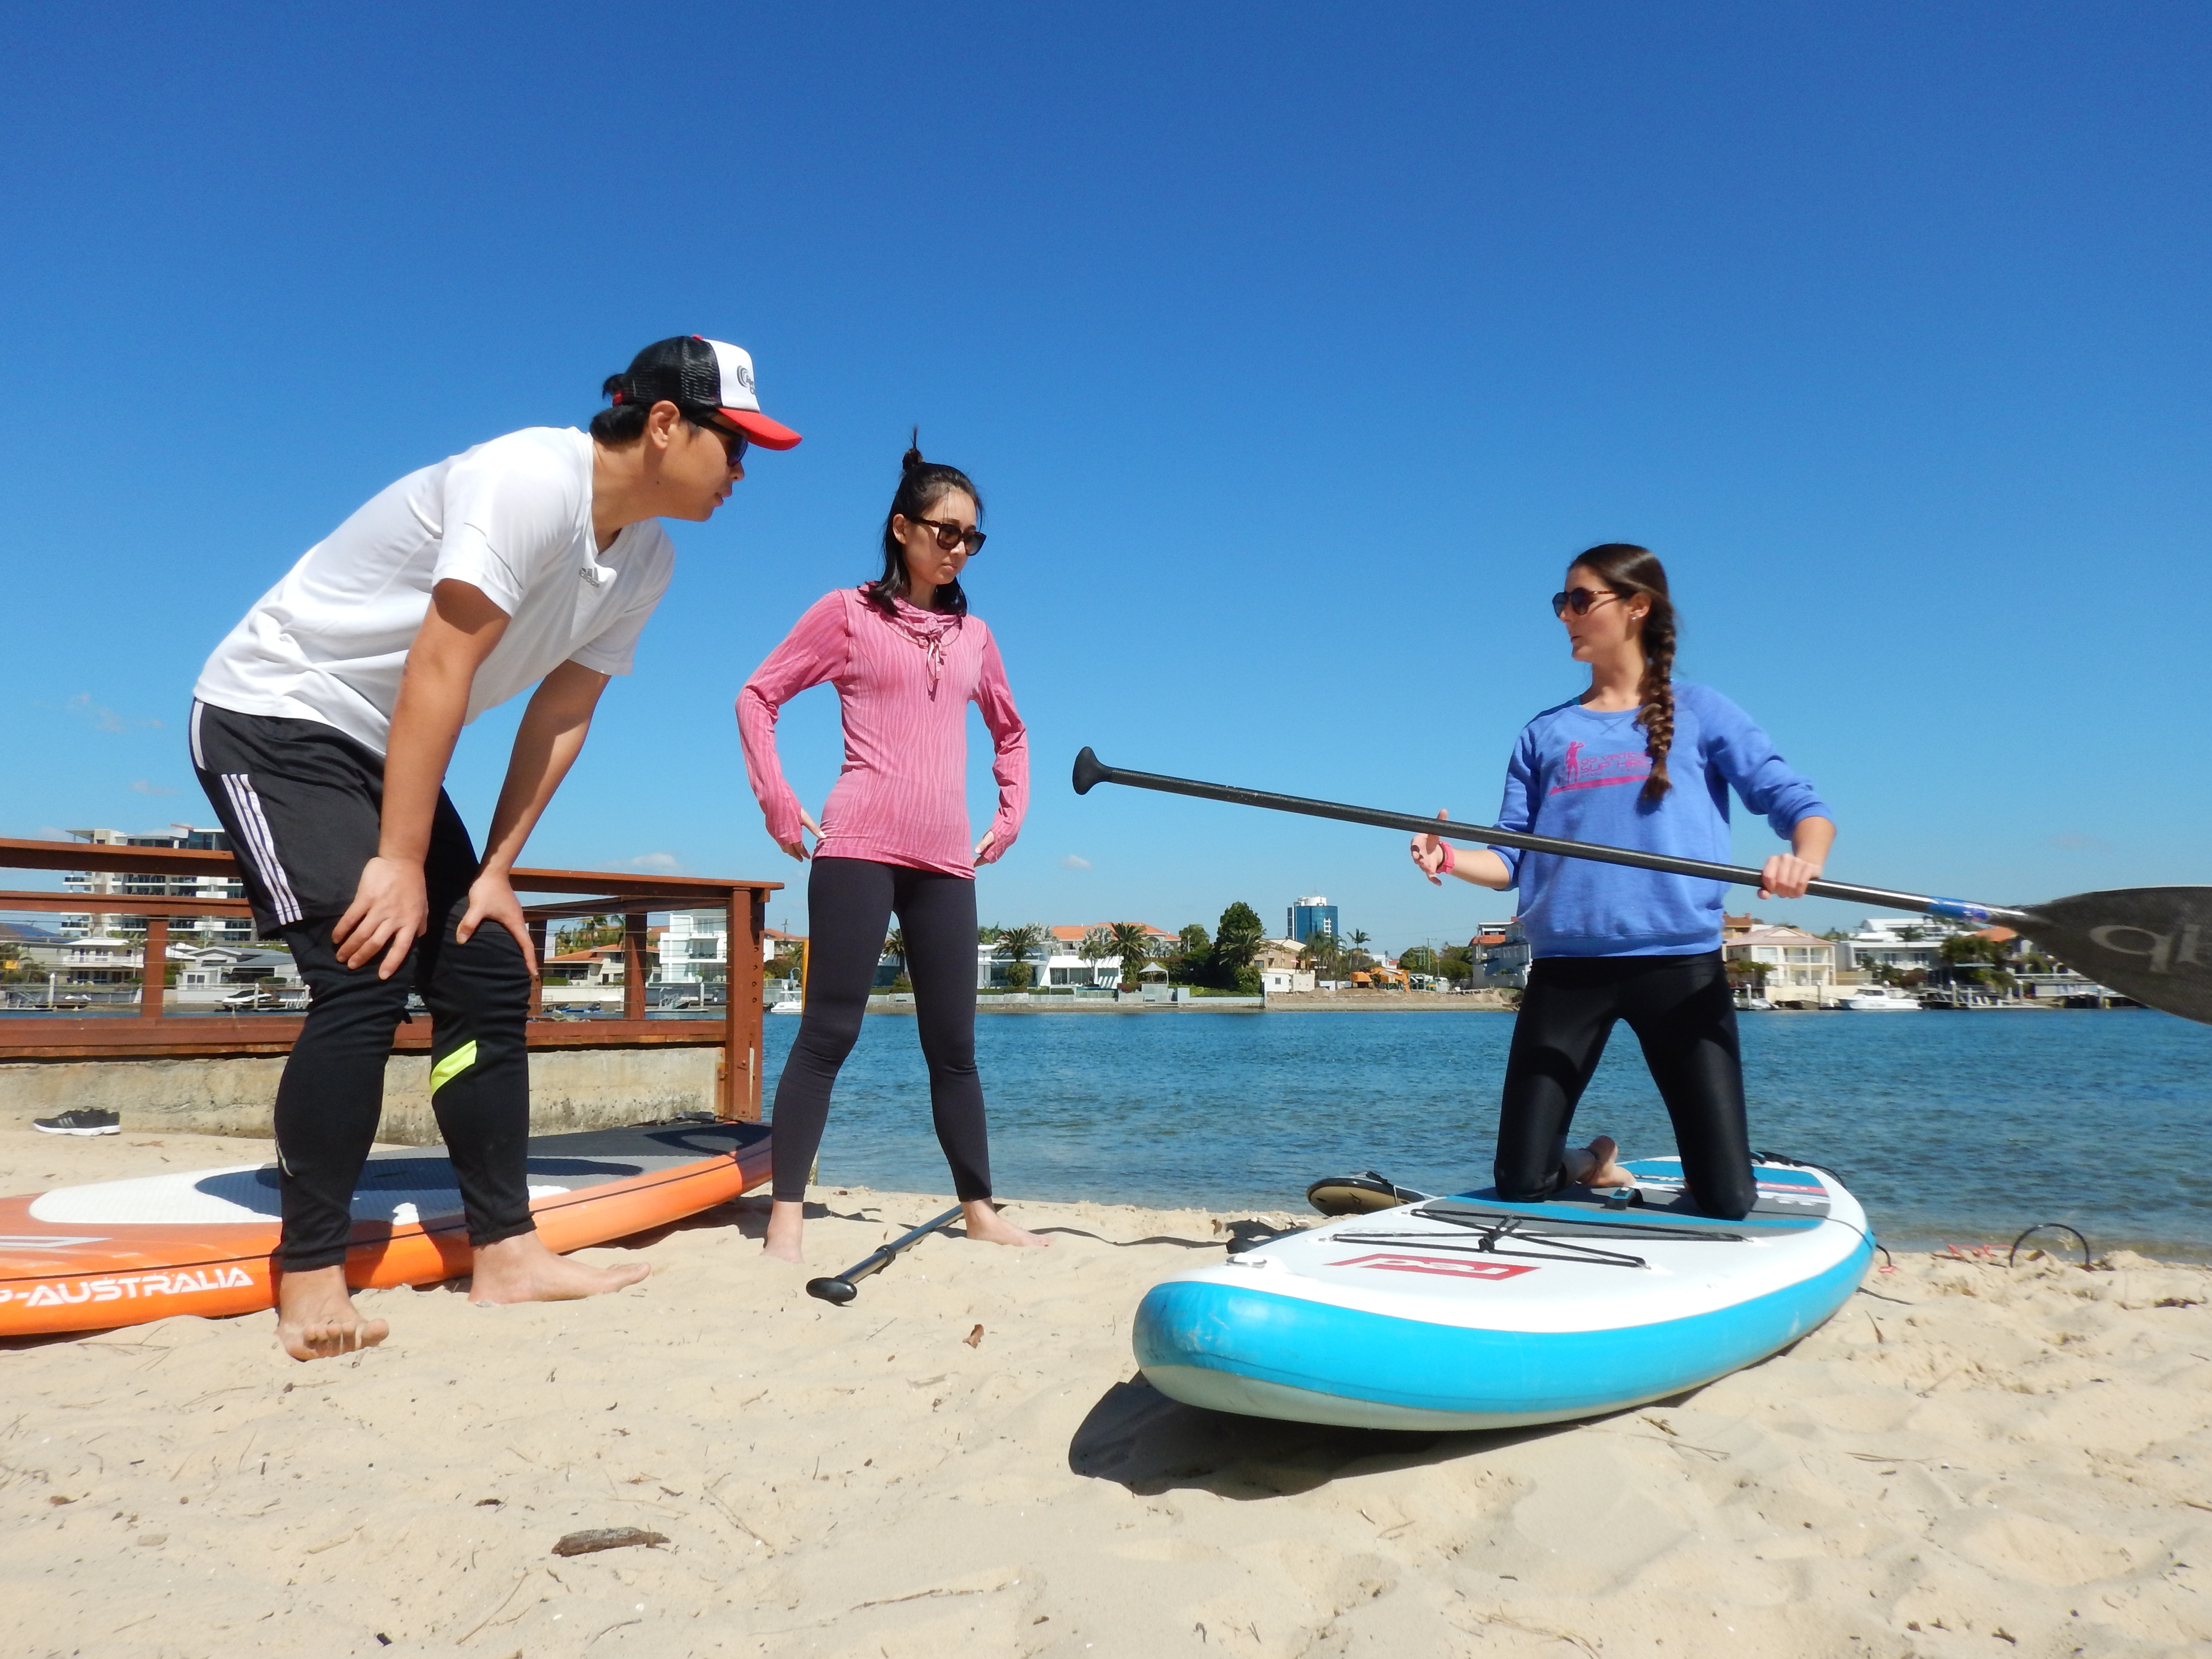 STAND UP PADDLE BEGINNER'S LESSON